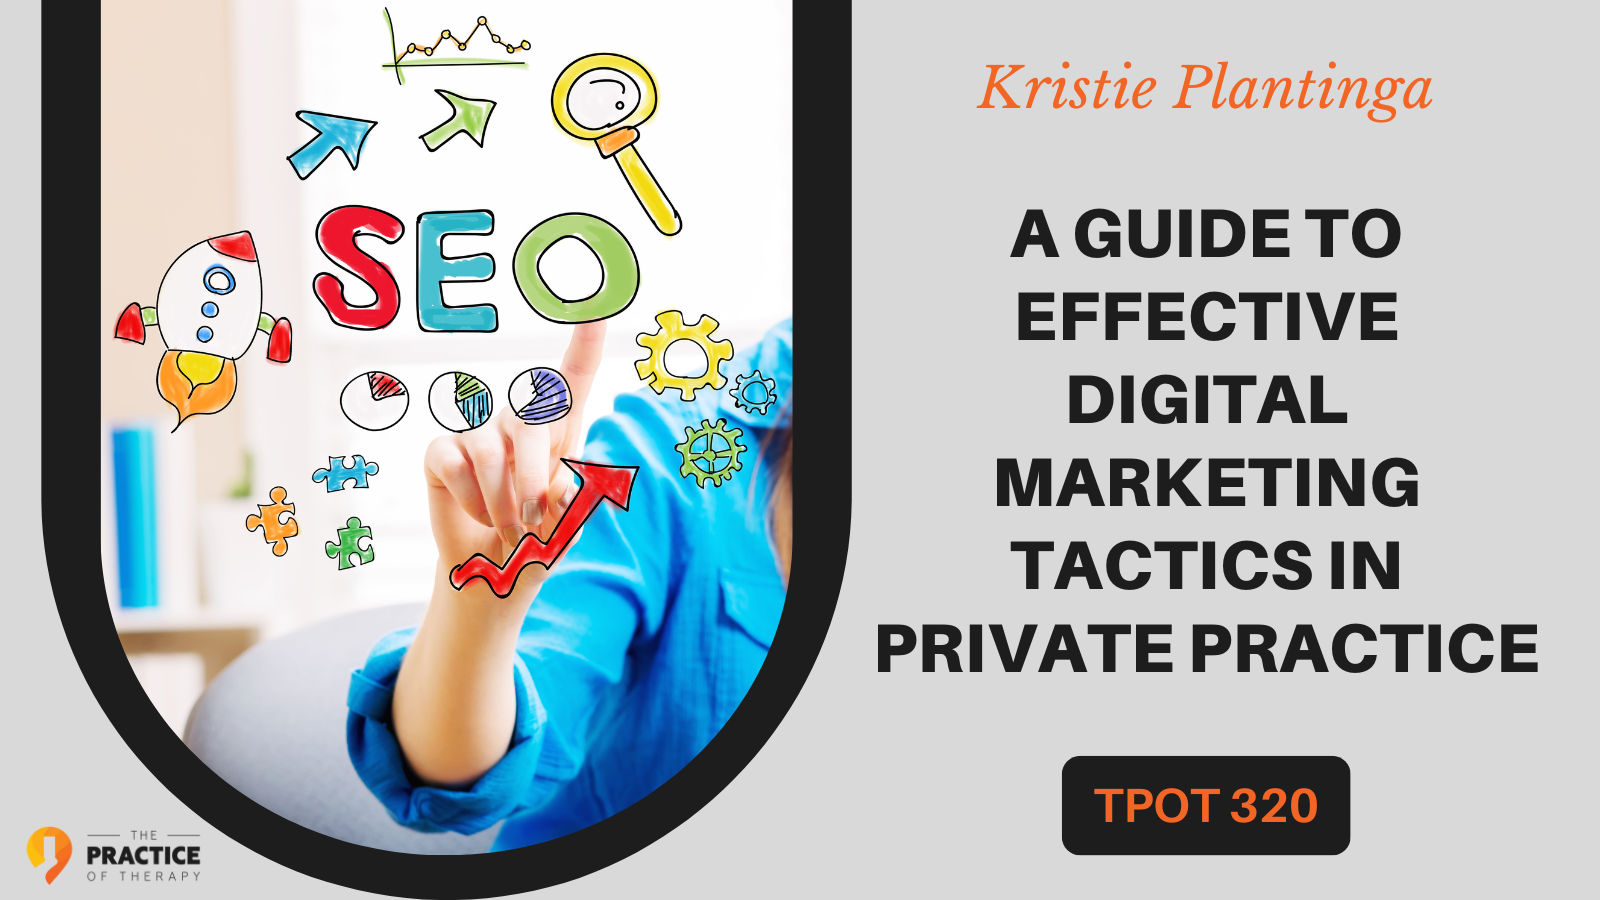 Kristie Plantinga A Guide to Effective Digital Marketing Tactics in Private Practice TPOT 320